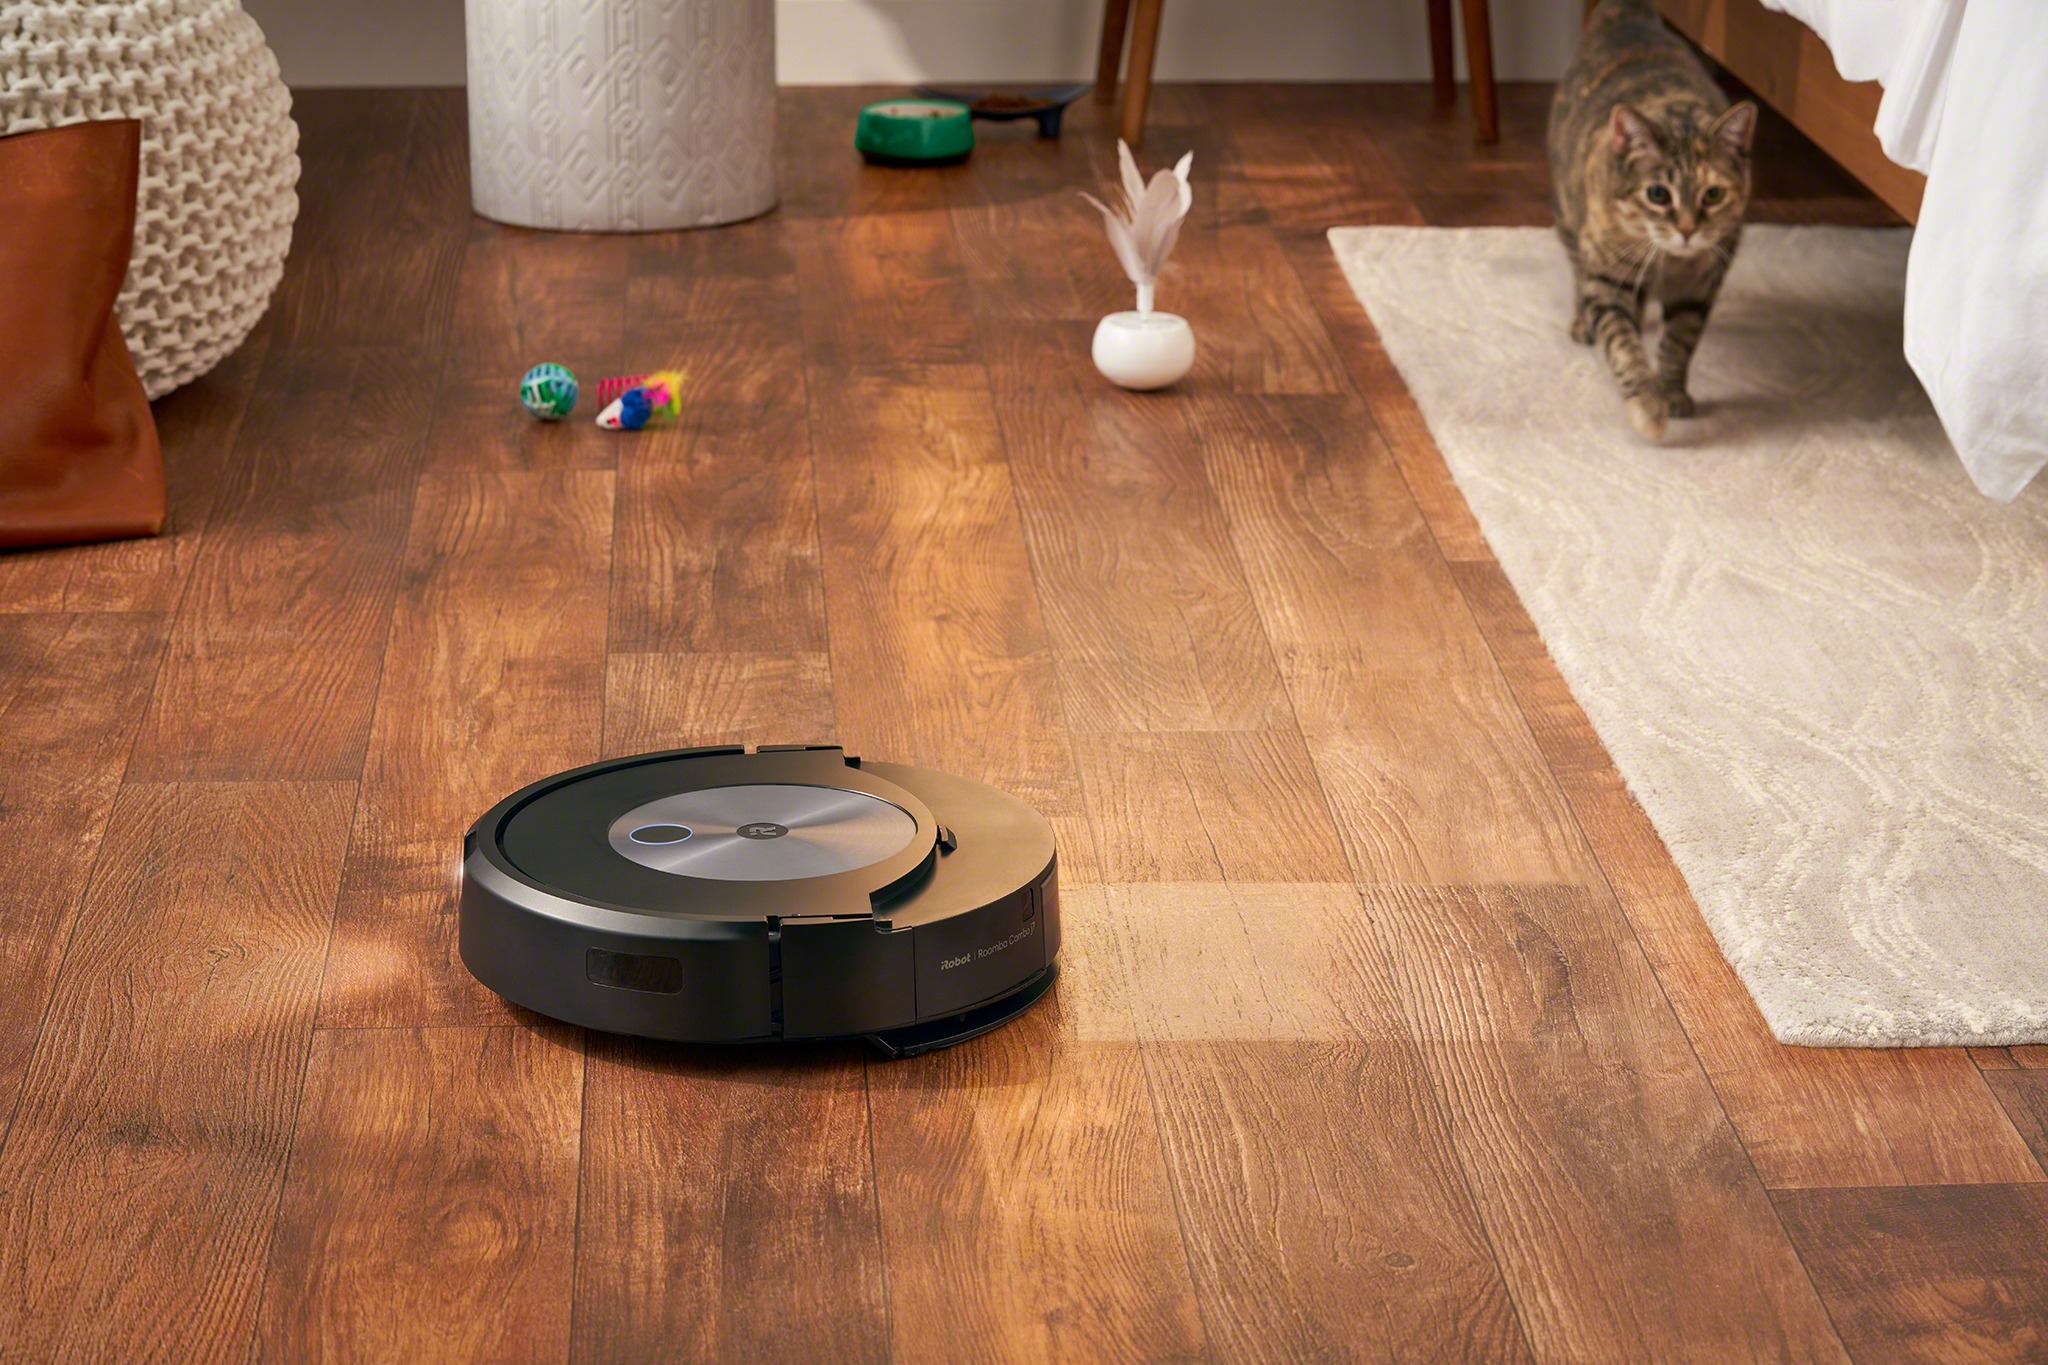 The j7+ is iRobot's first two-in-one vacuum and mop combo